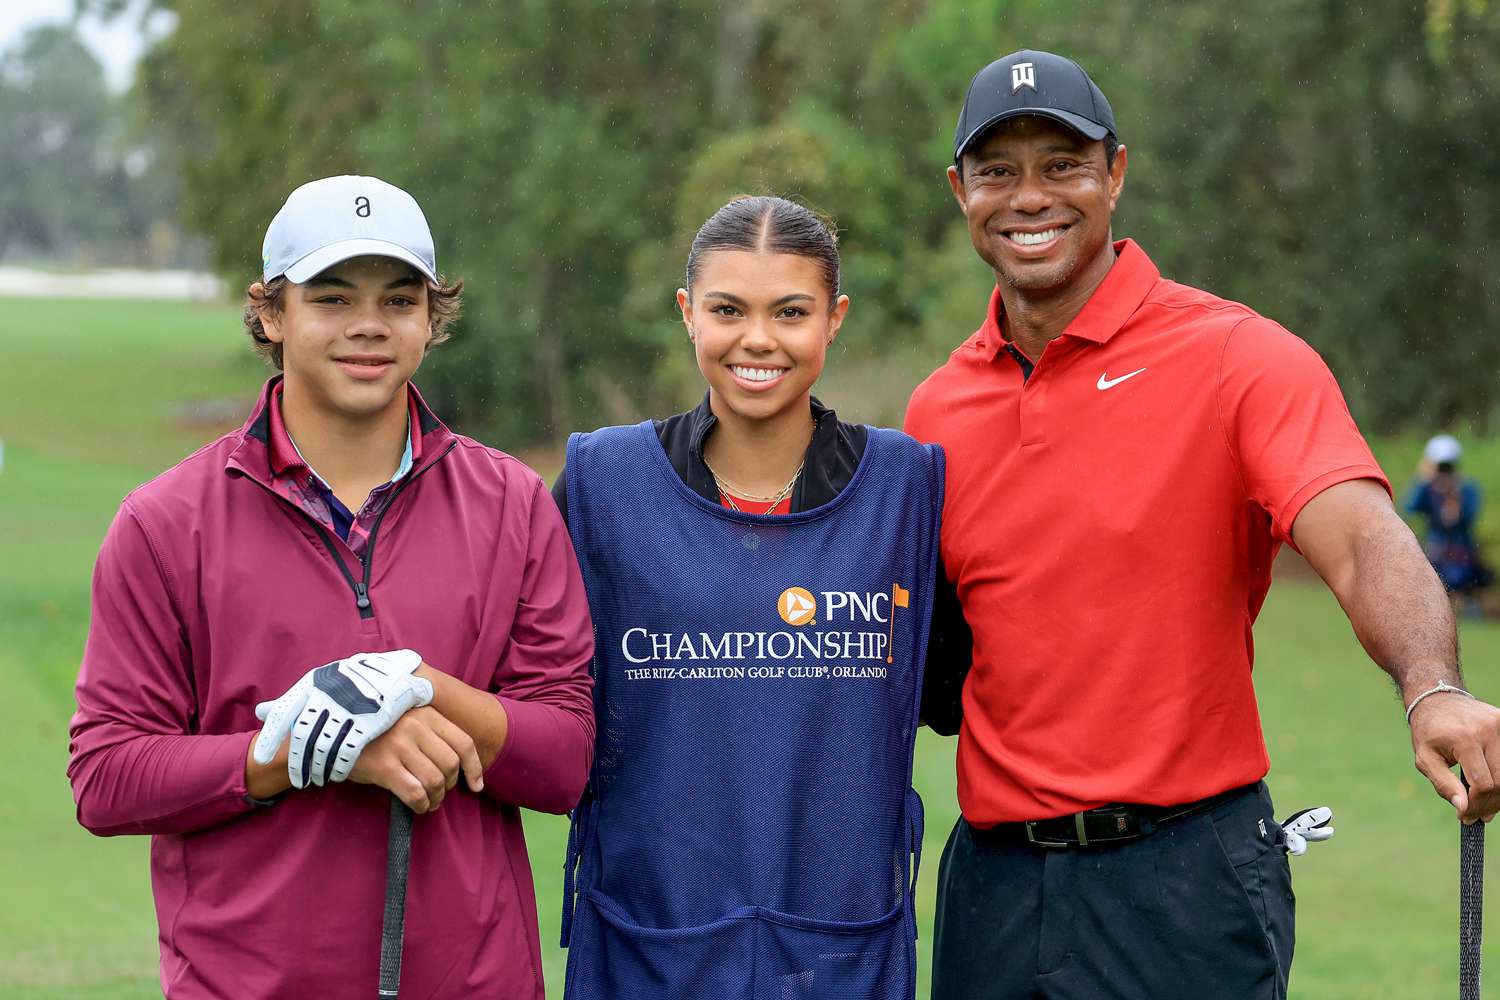 tiger-woods-and-daughter-121823-5-45b37fcaf7b54ba0acbe4008a301cbbe.jpg (137 KB)